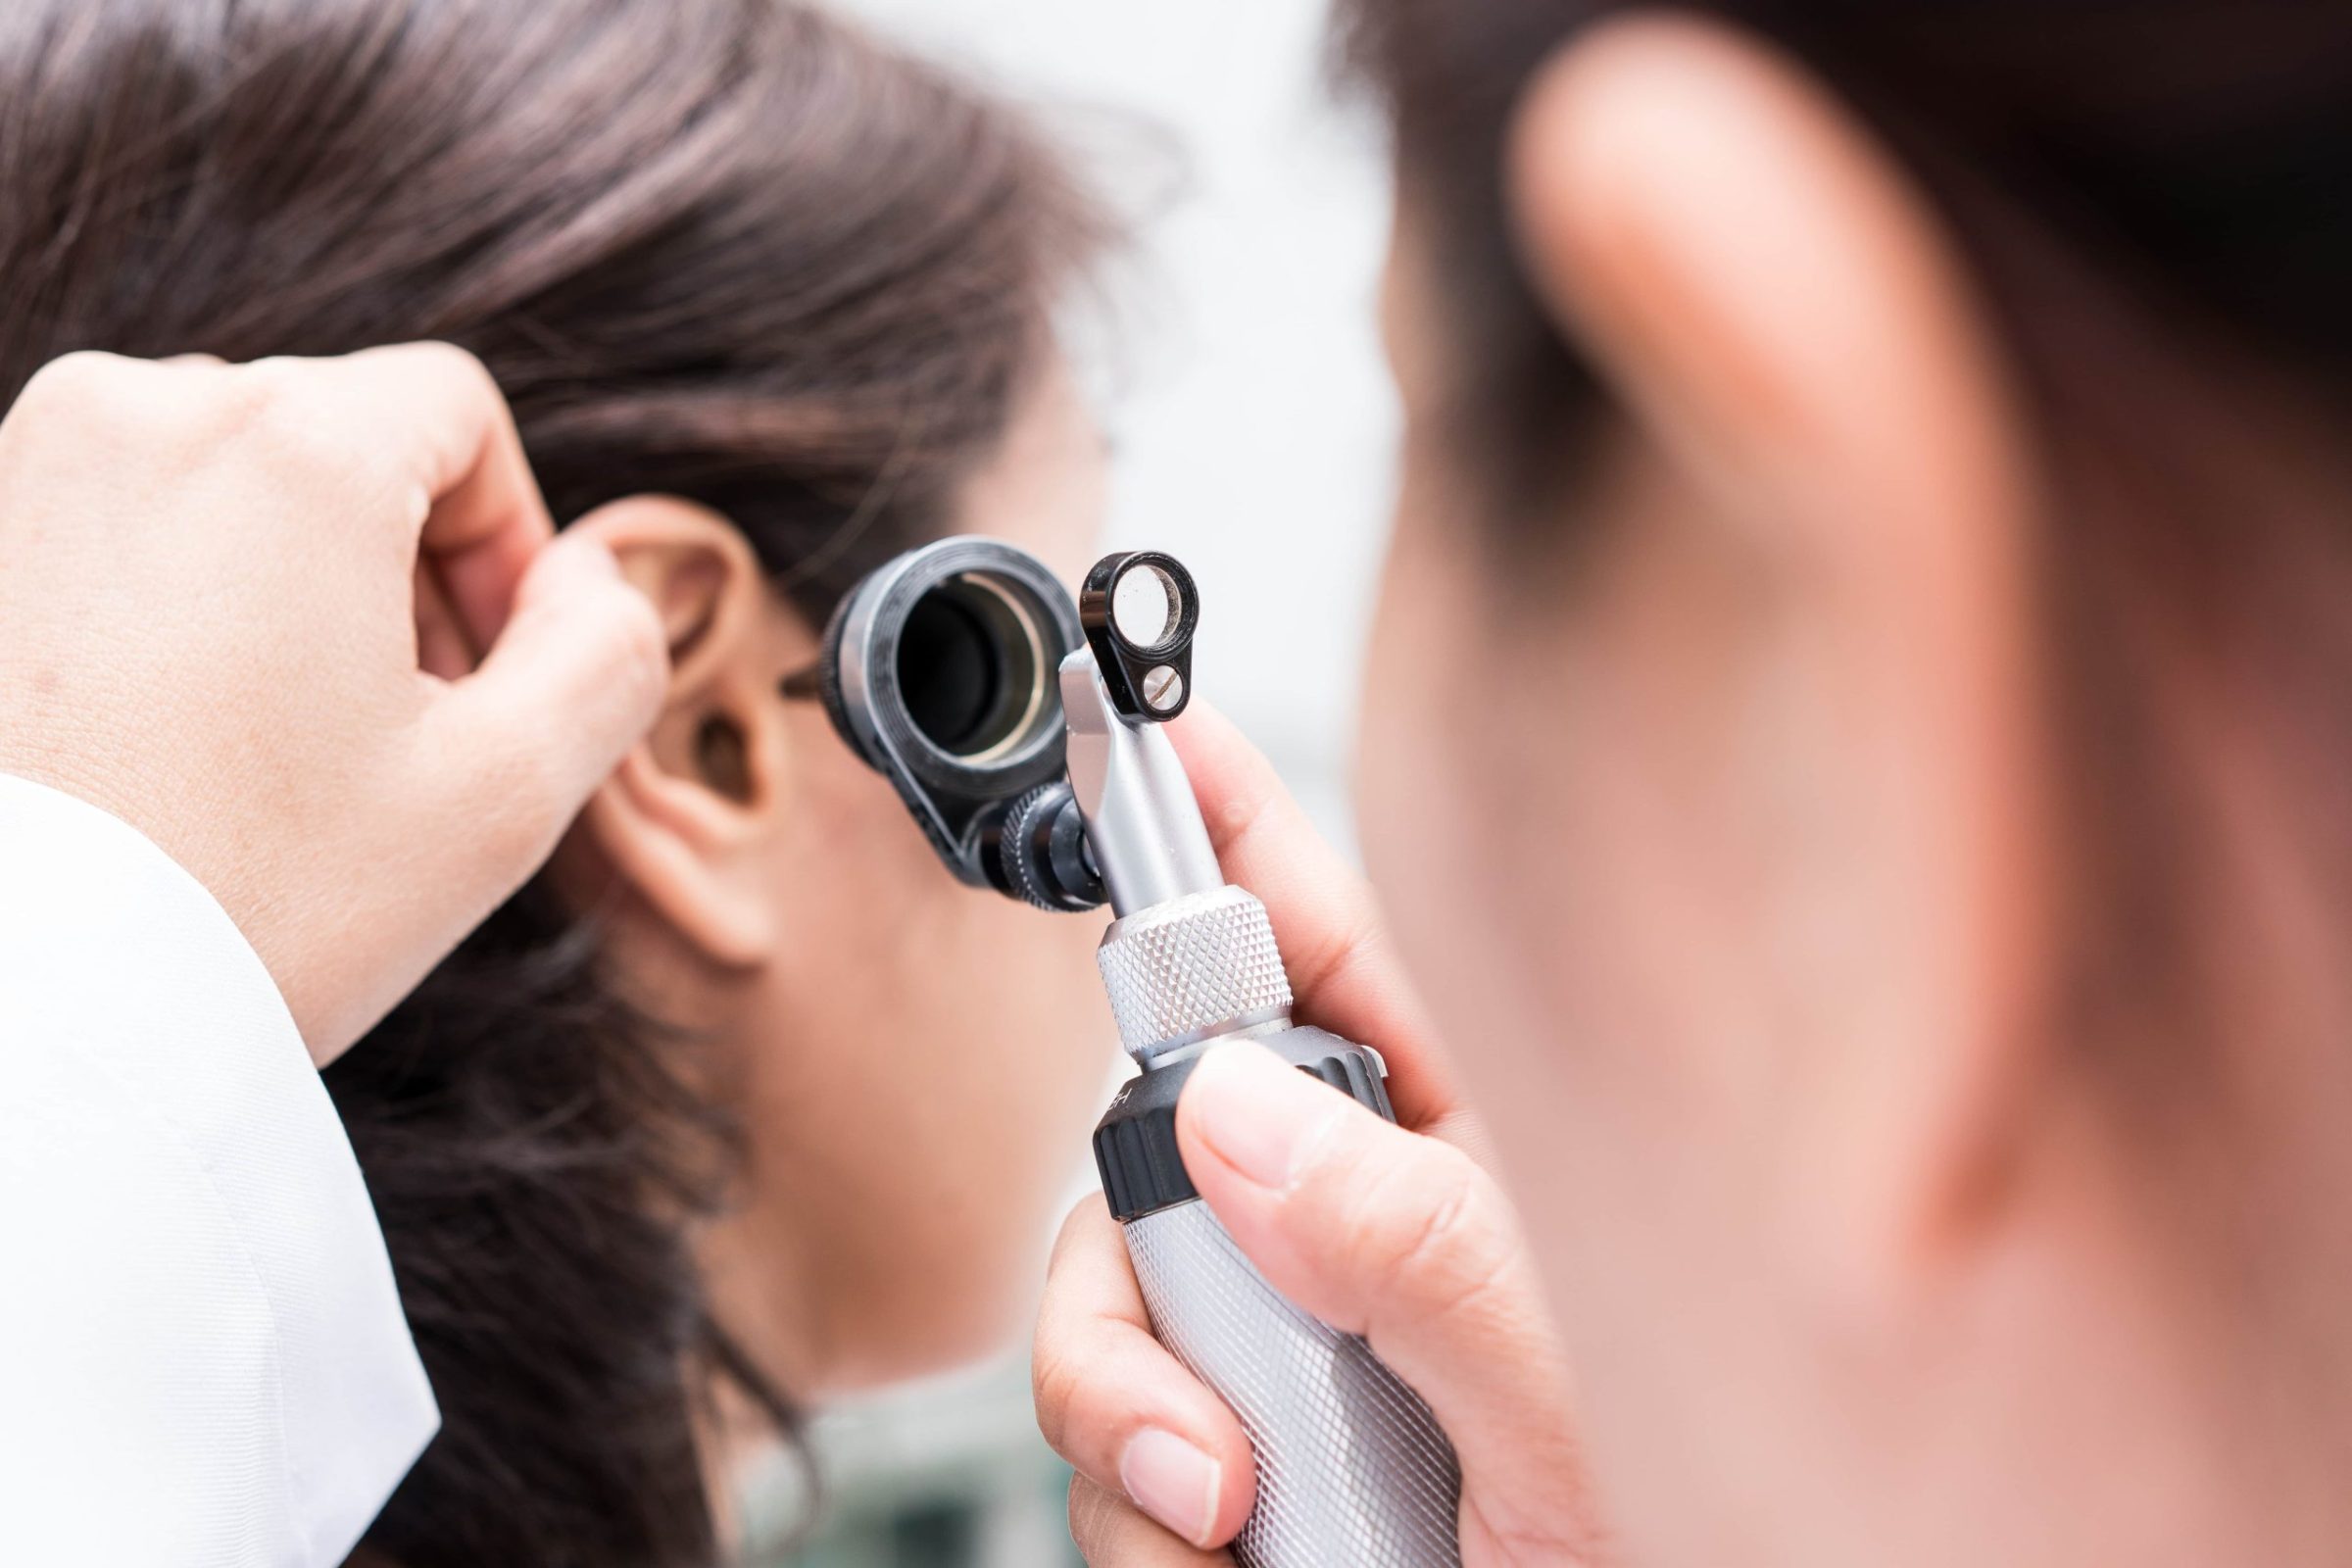 How to Become a Hearing Aid Specialist